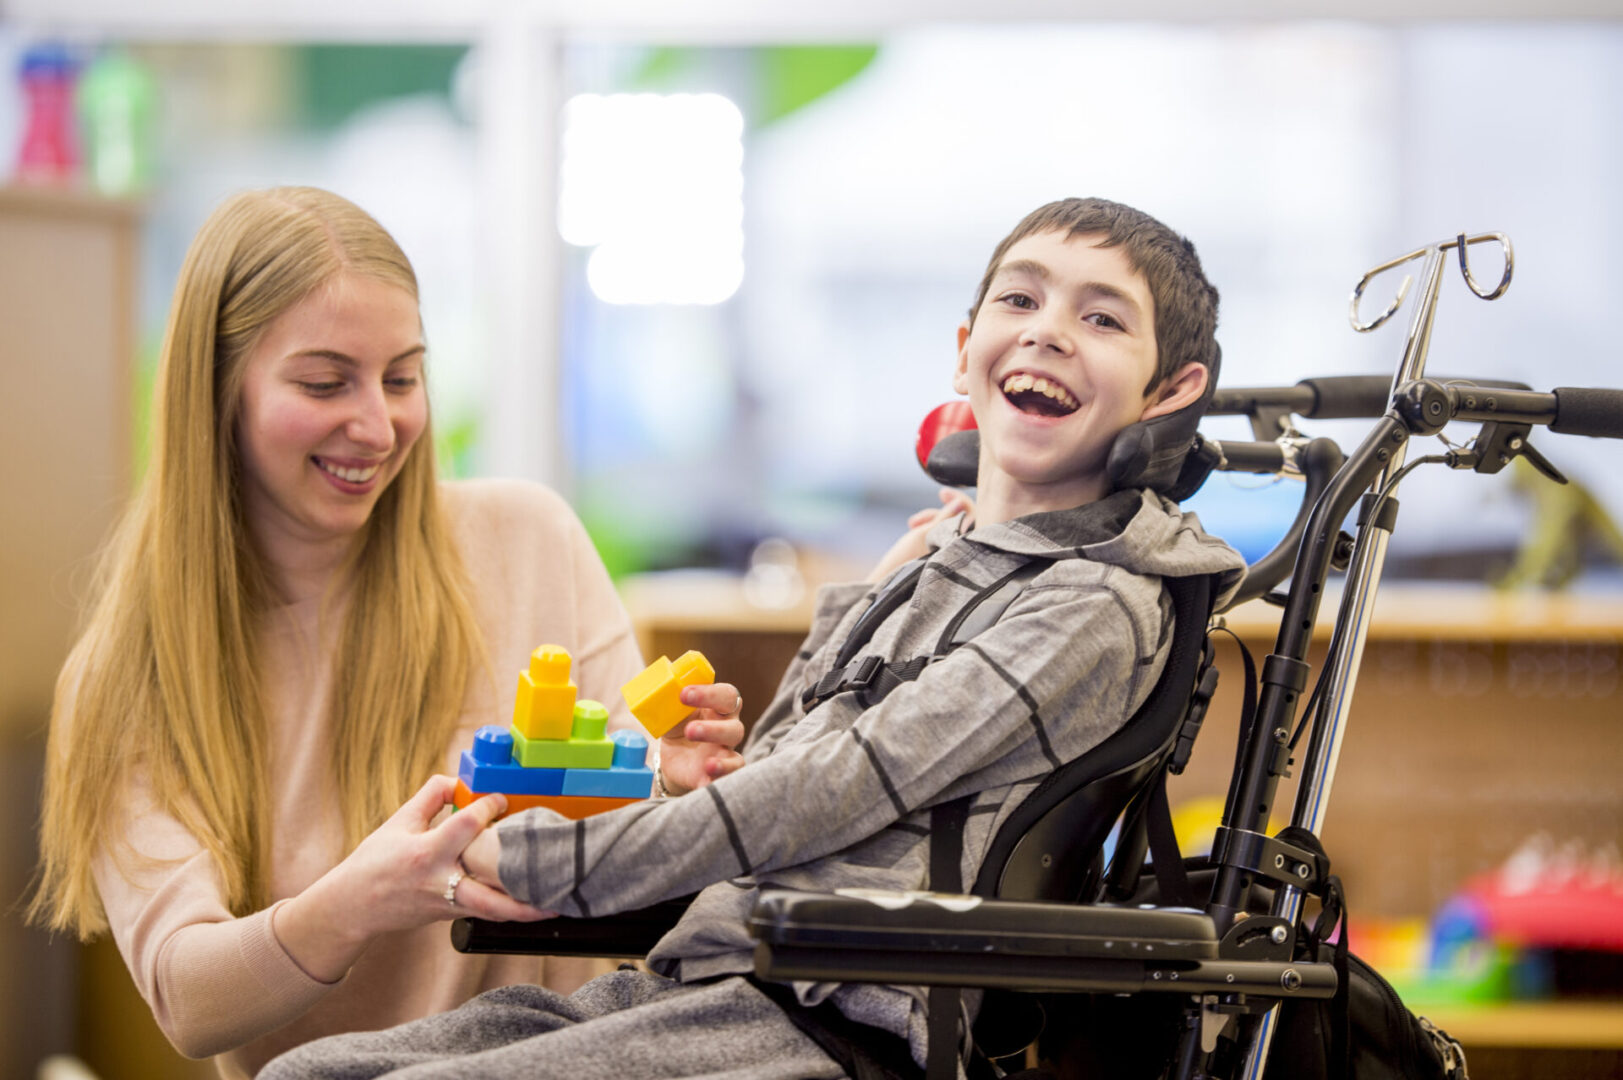 A boy in a wheelchair smiling at the camera.